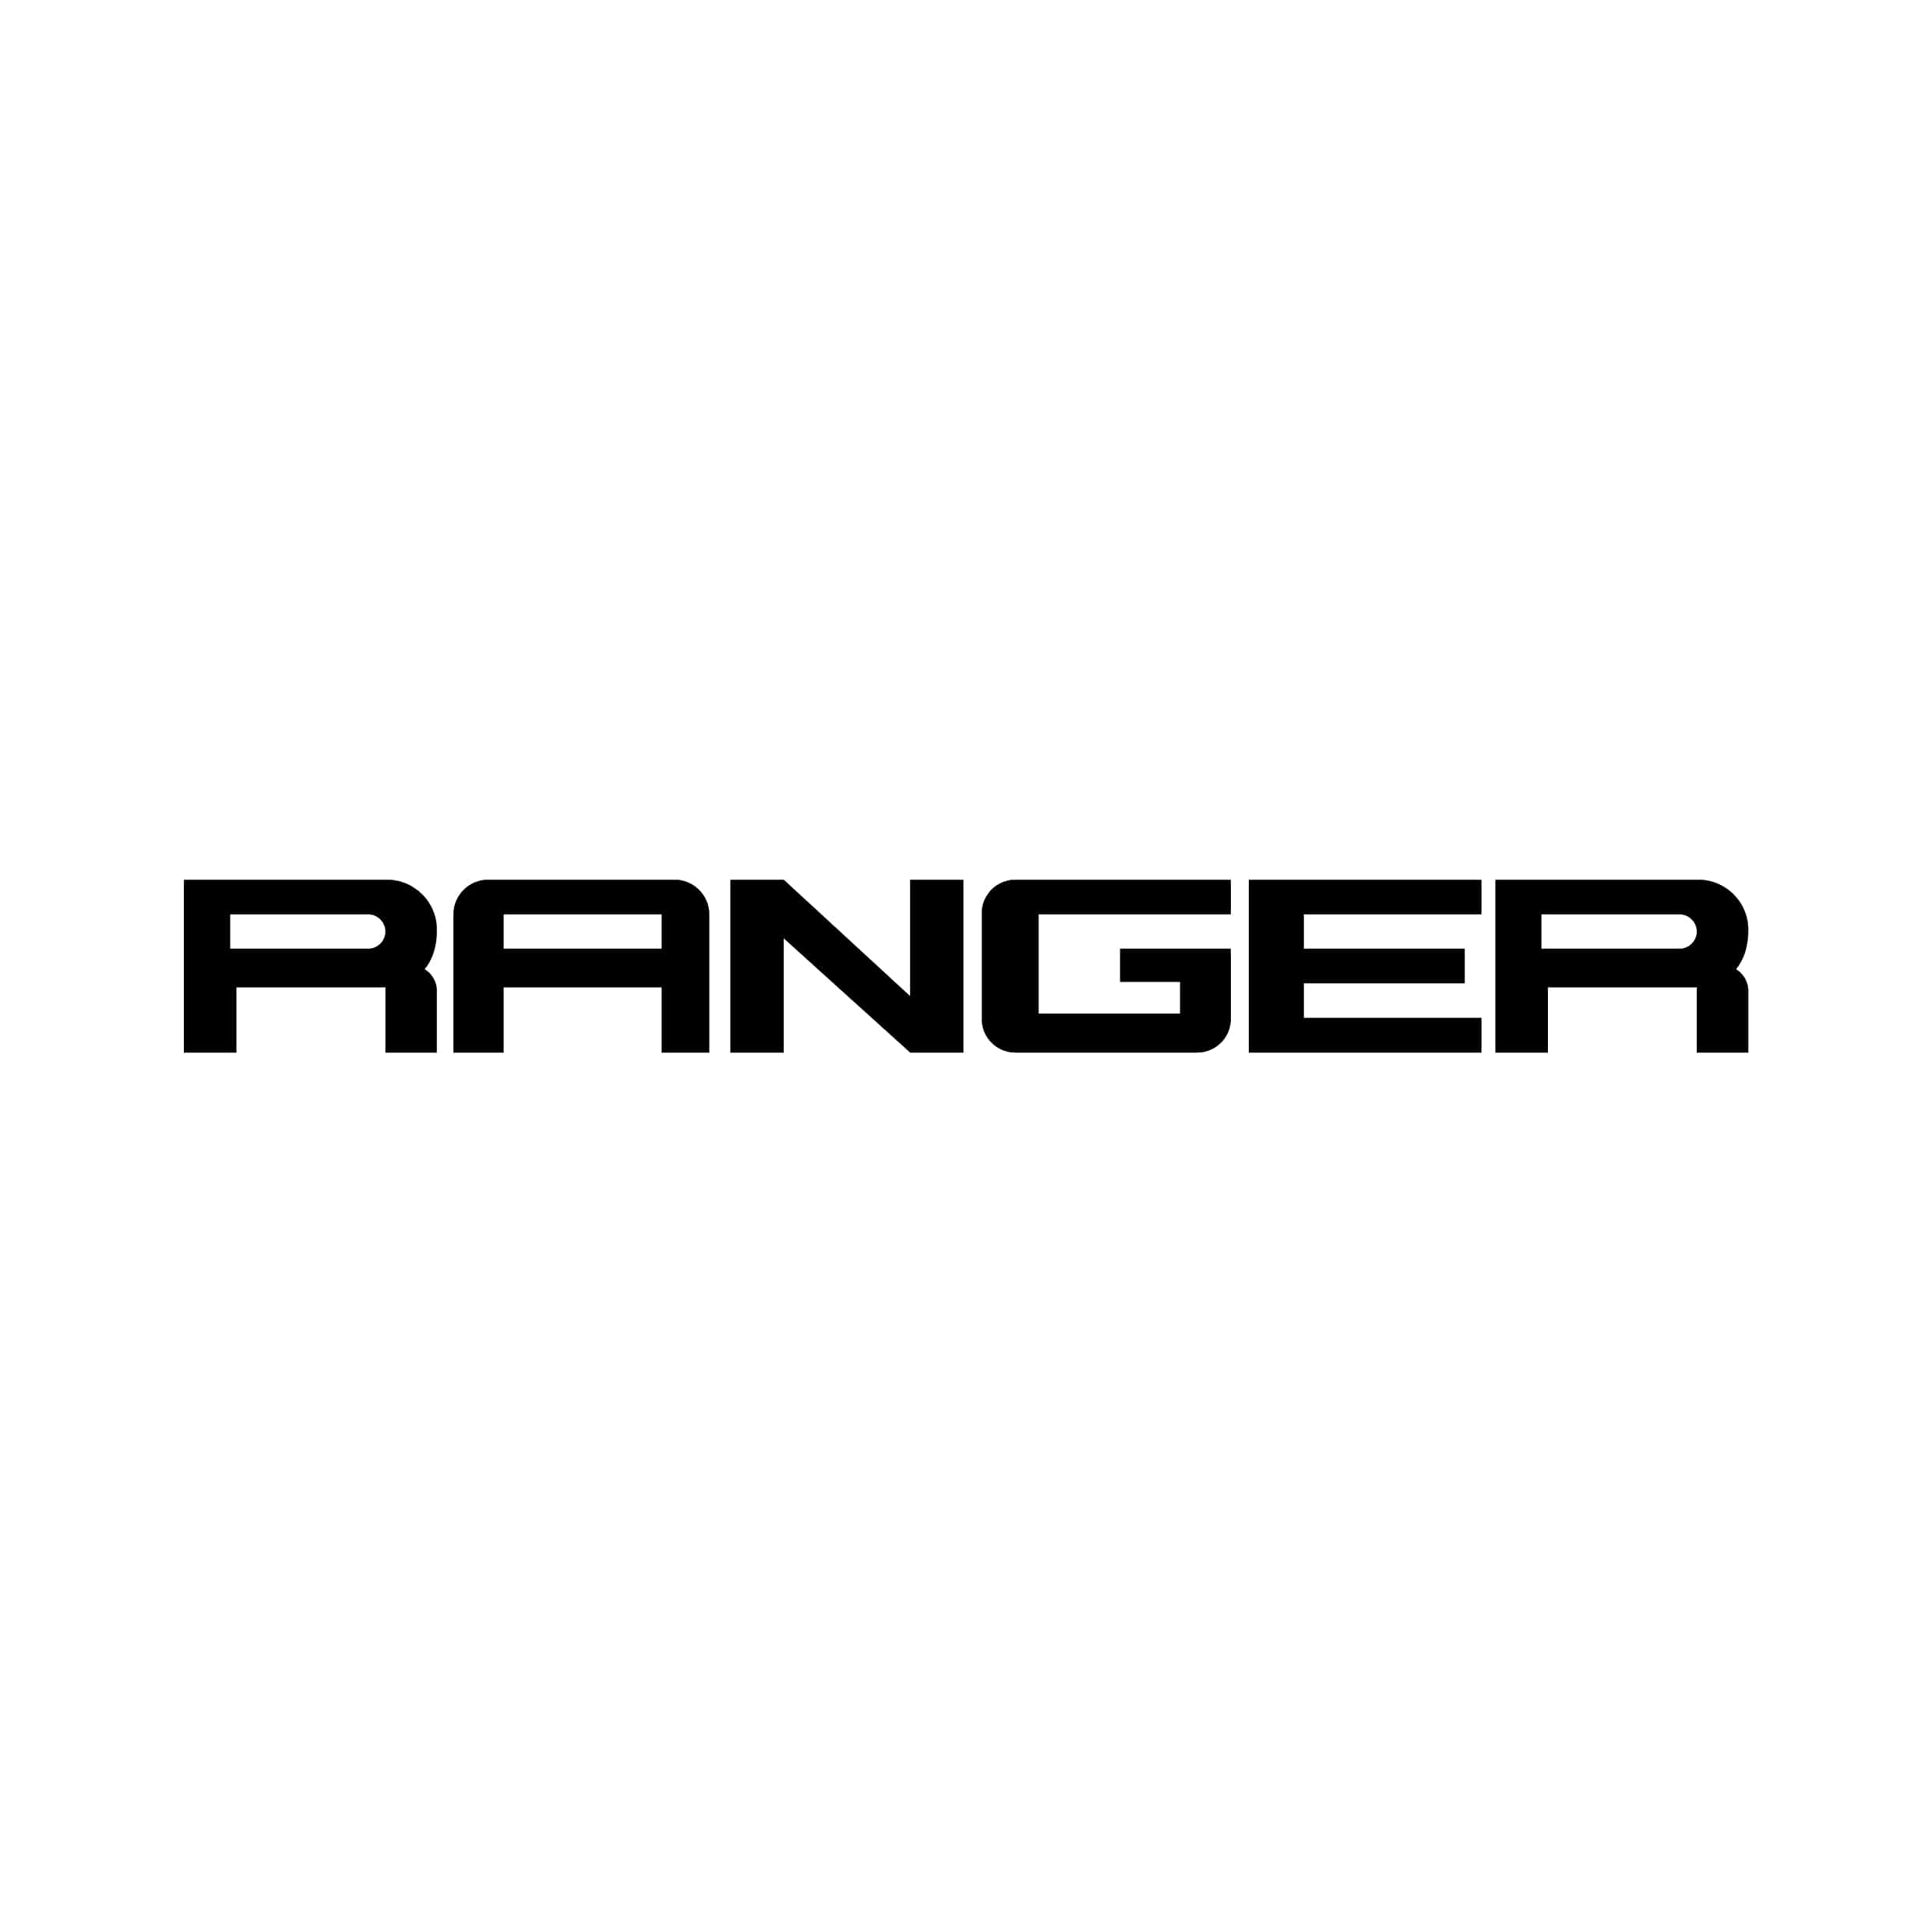 stickers-ford-ranger-ref35-autocollant-voiture-sticker-auto-autocollants-decals-sponsors-racing-tuning-sport-logo-min